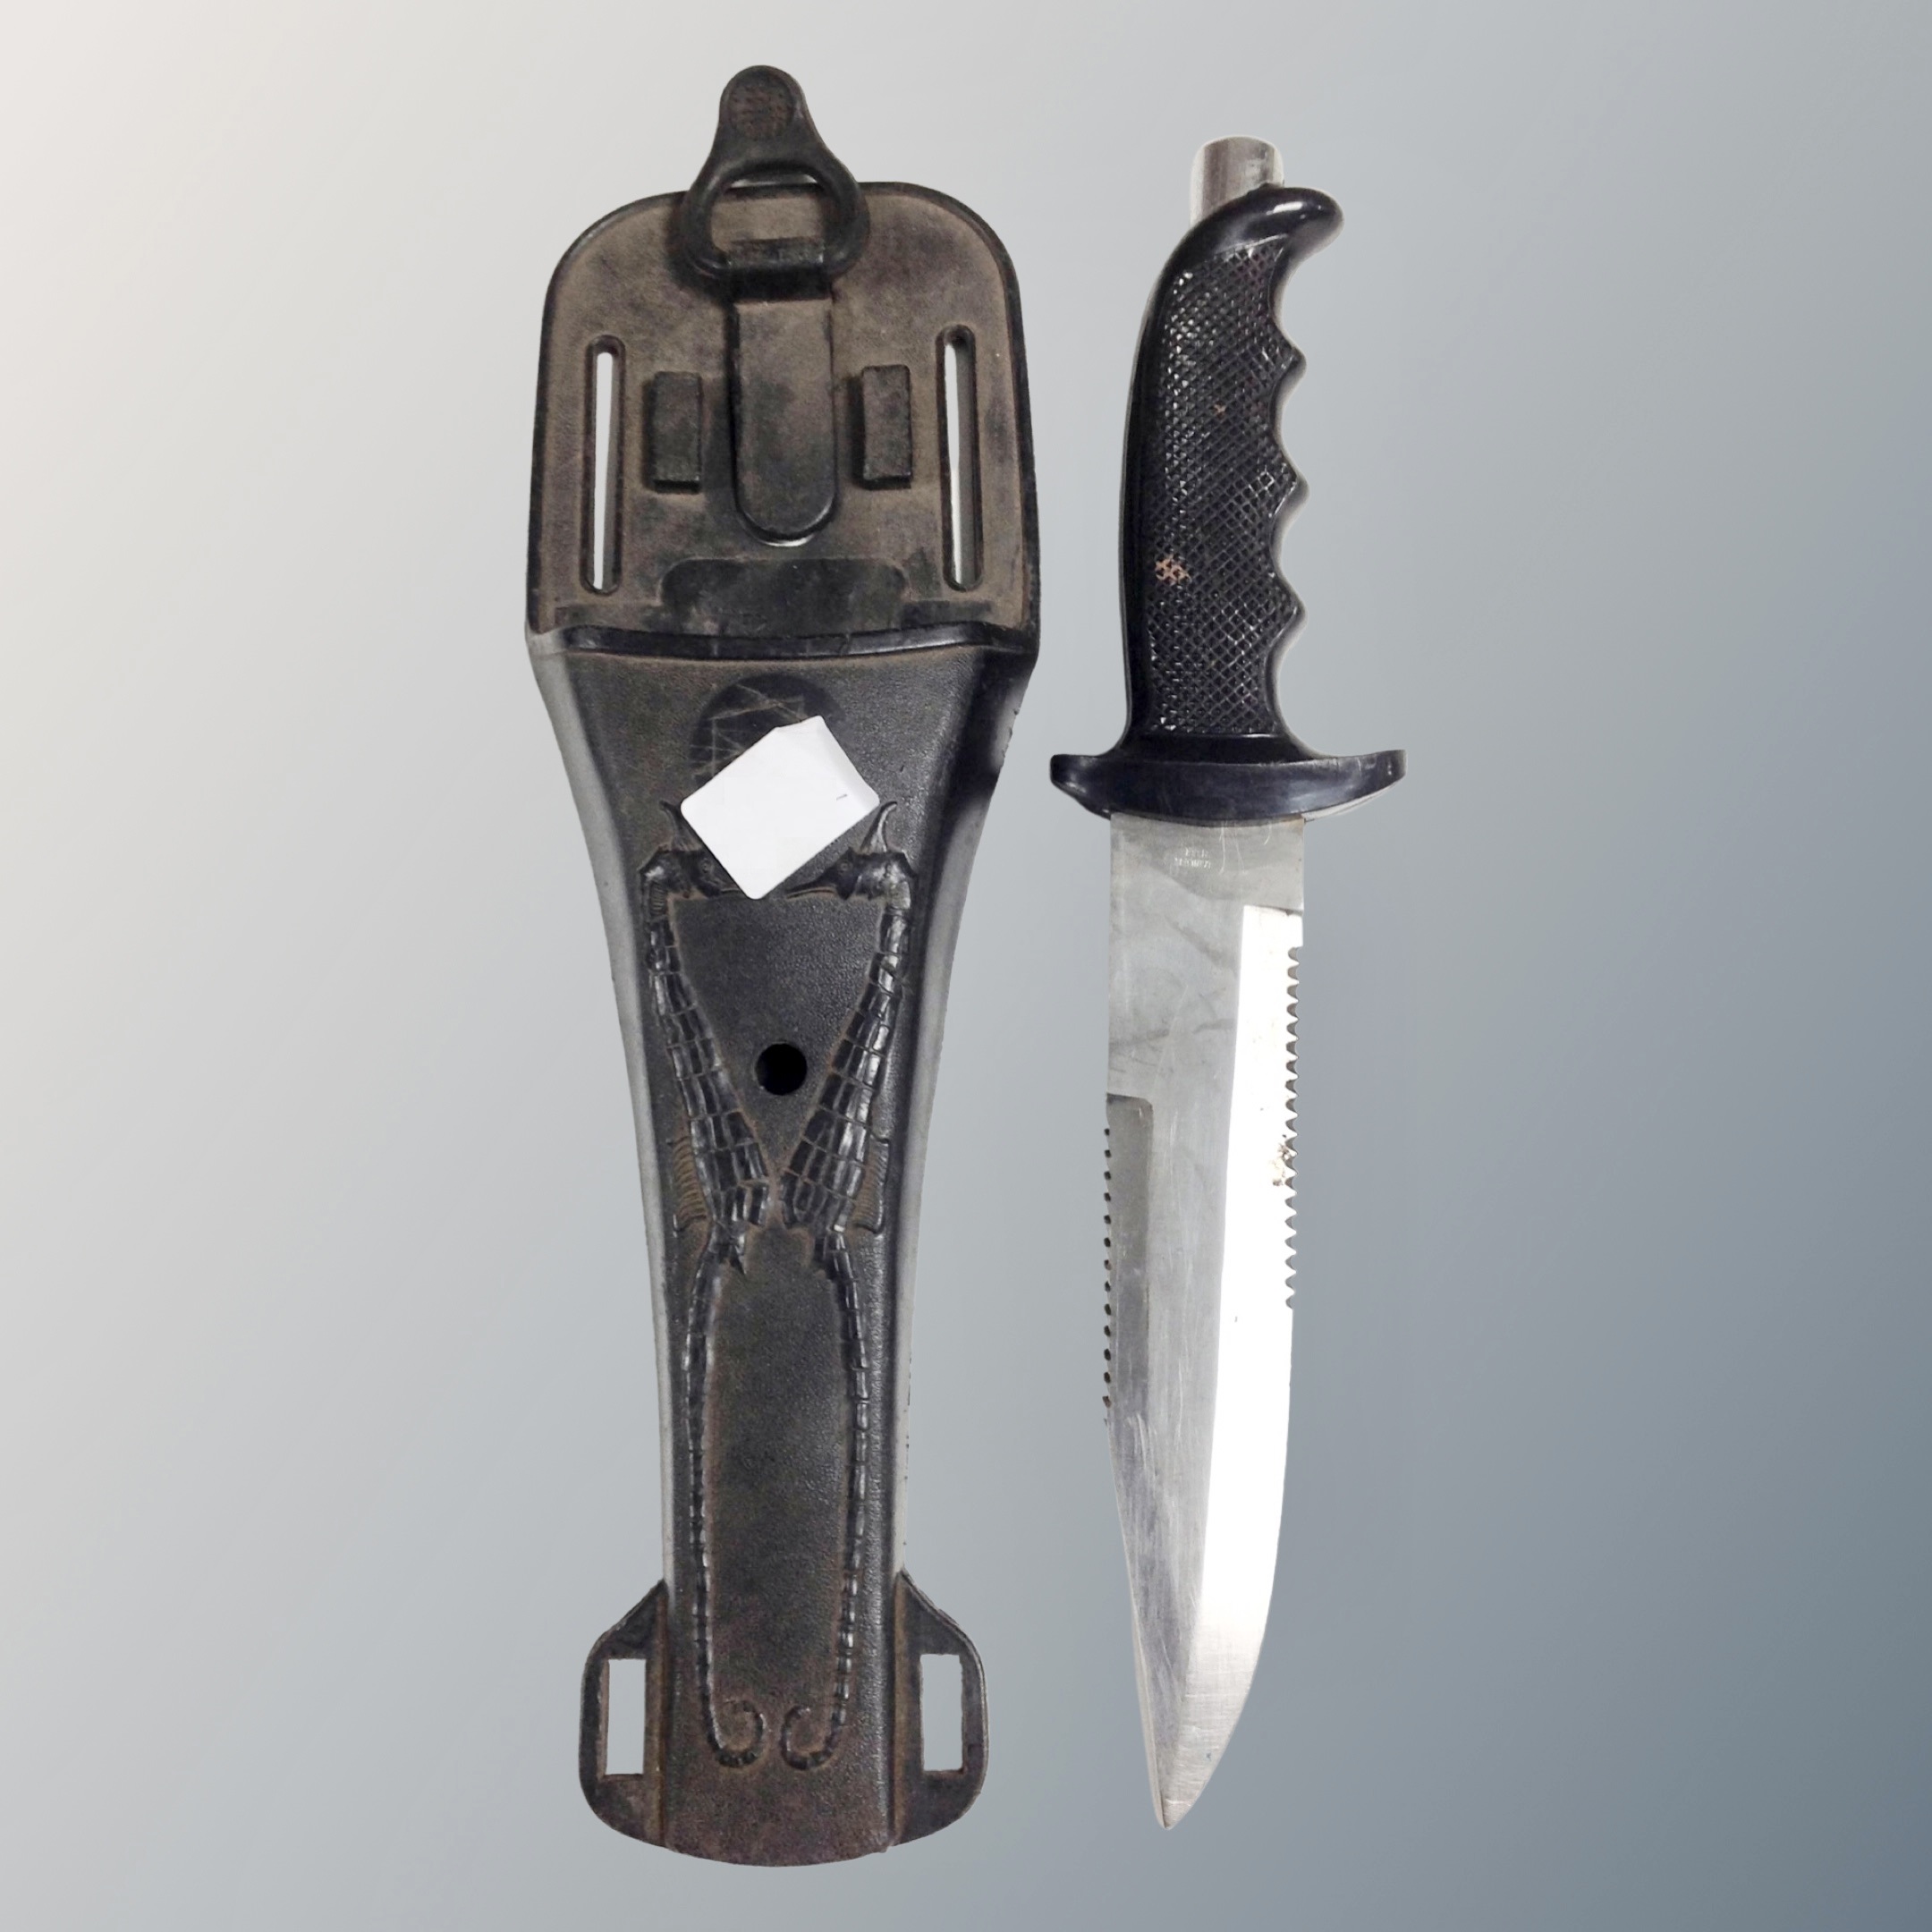 A knife in holster with belt